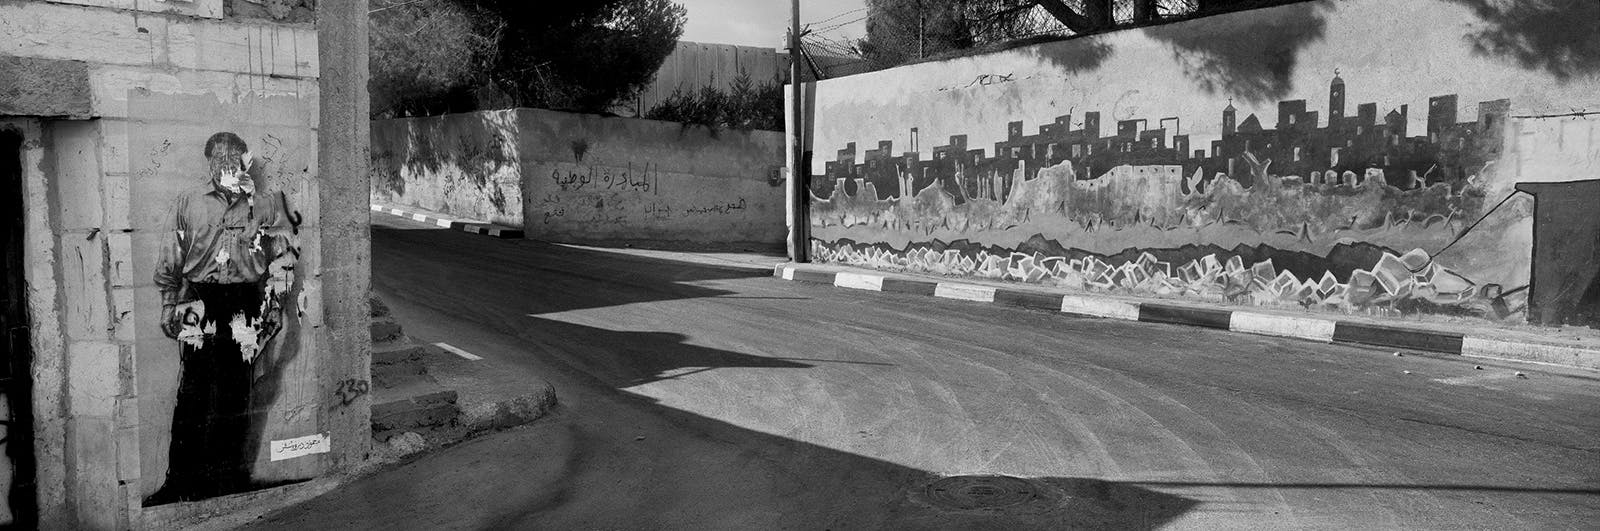 A poster of the Palestinian poet Mahmoud Darwish (left), Aida refugee camp, near Bethlehem, West Bank, 2009; photograph by Josef Koudelka from ‘This Place,’ an exhibition of pictures by twelve photographers of Israel and the West Bank, at the Brooklyn